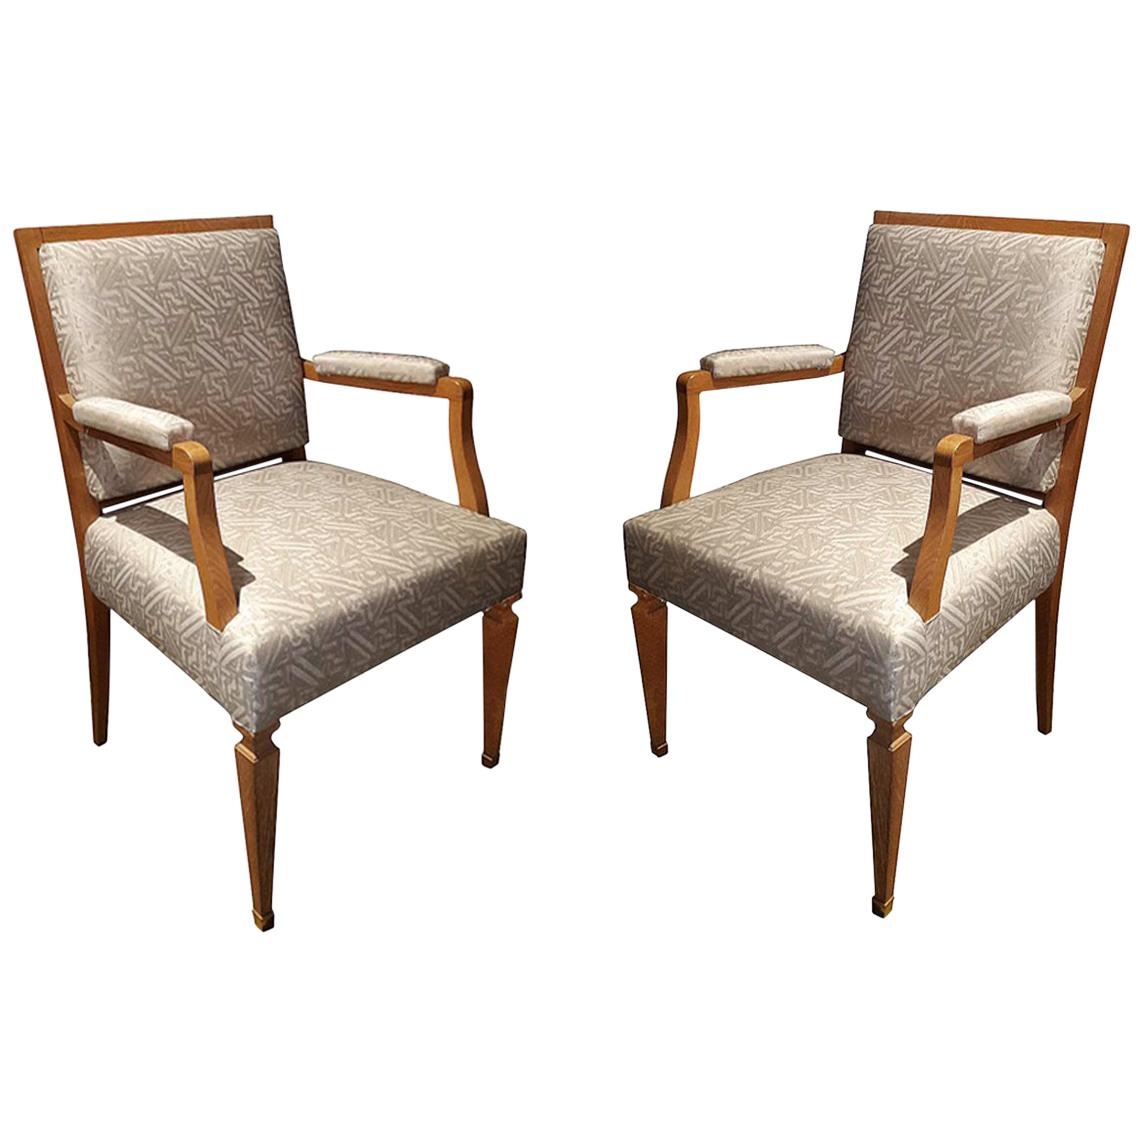 Oak French Chairs, Mid-20th Century